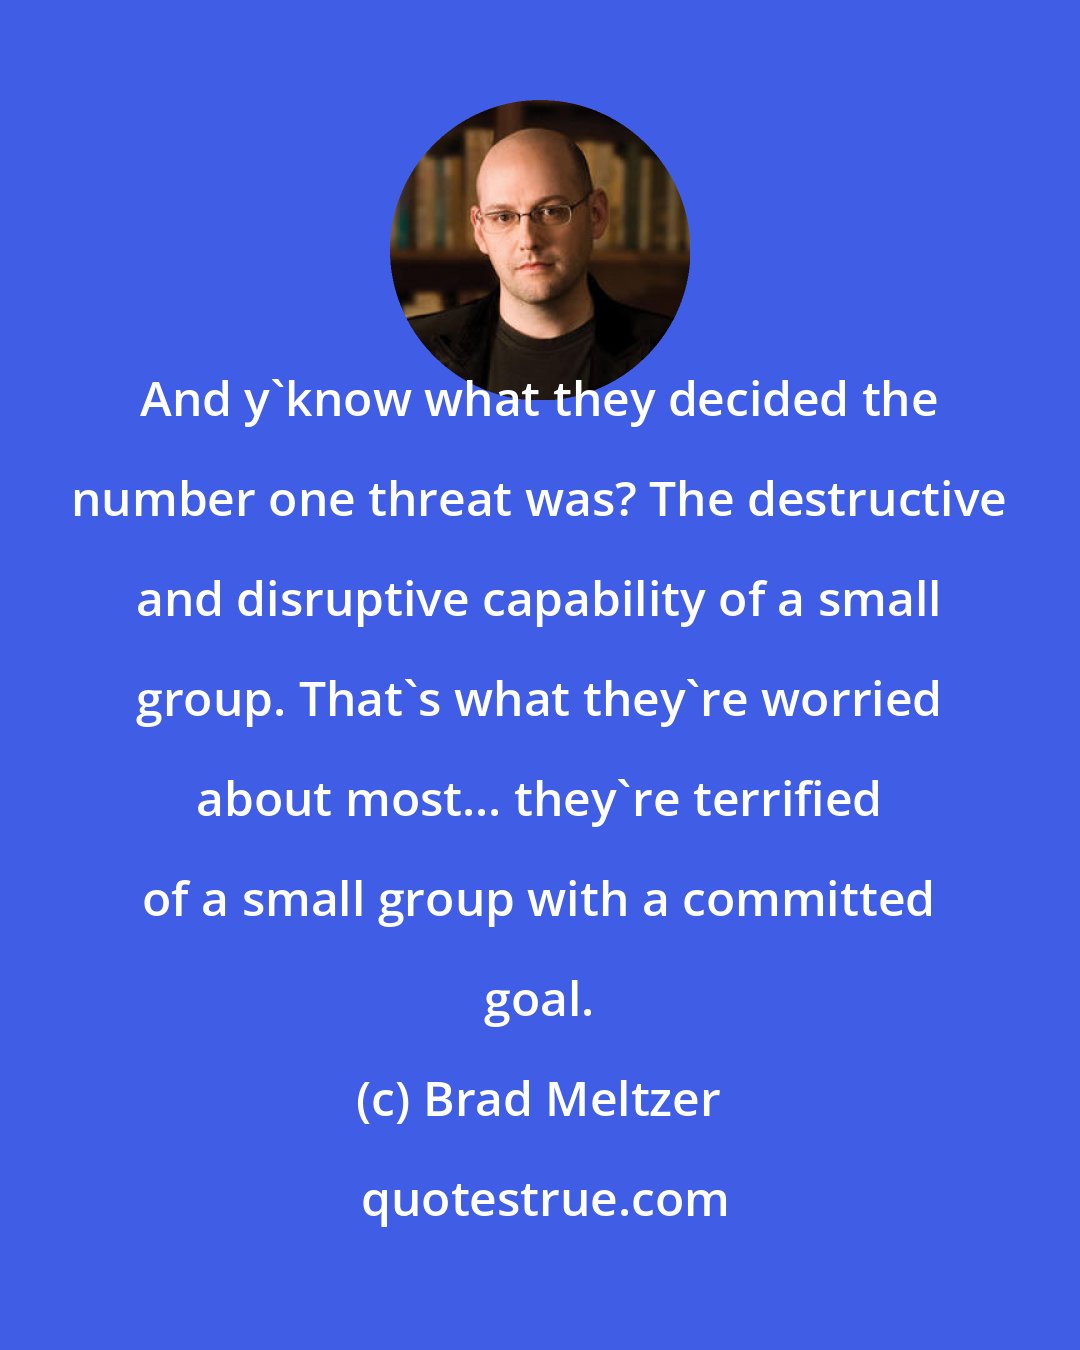 Brad Meltzer: And y'know what they decided the number one threat was? The destructive and disruptive capability of a small group. That's what they're worried about most... they're terrified of a small group with a committed goal.